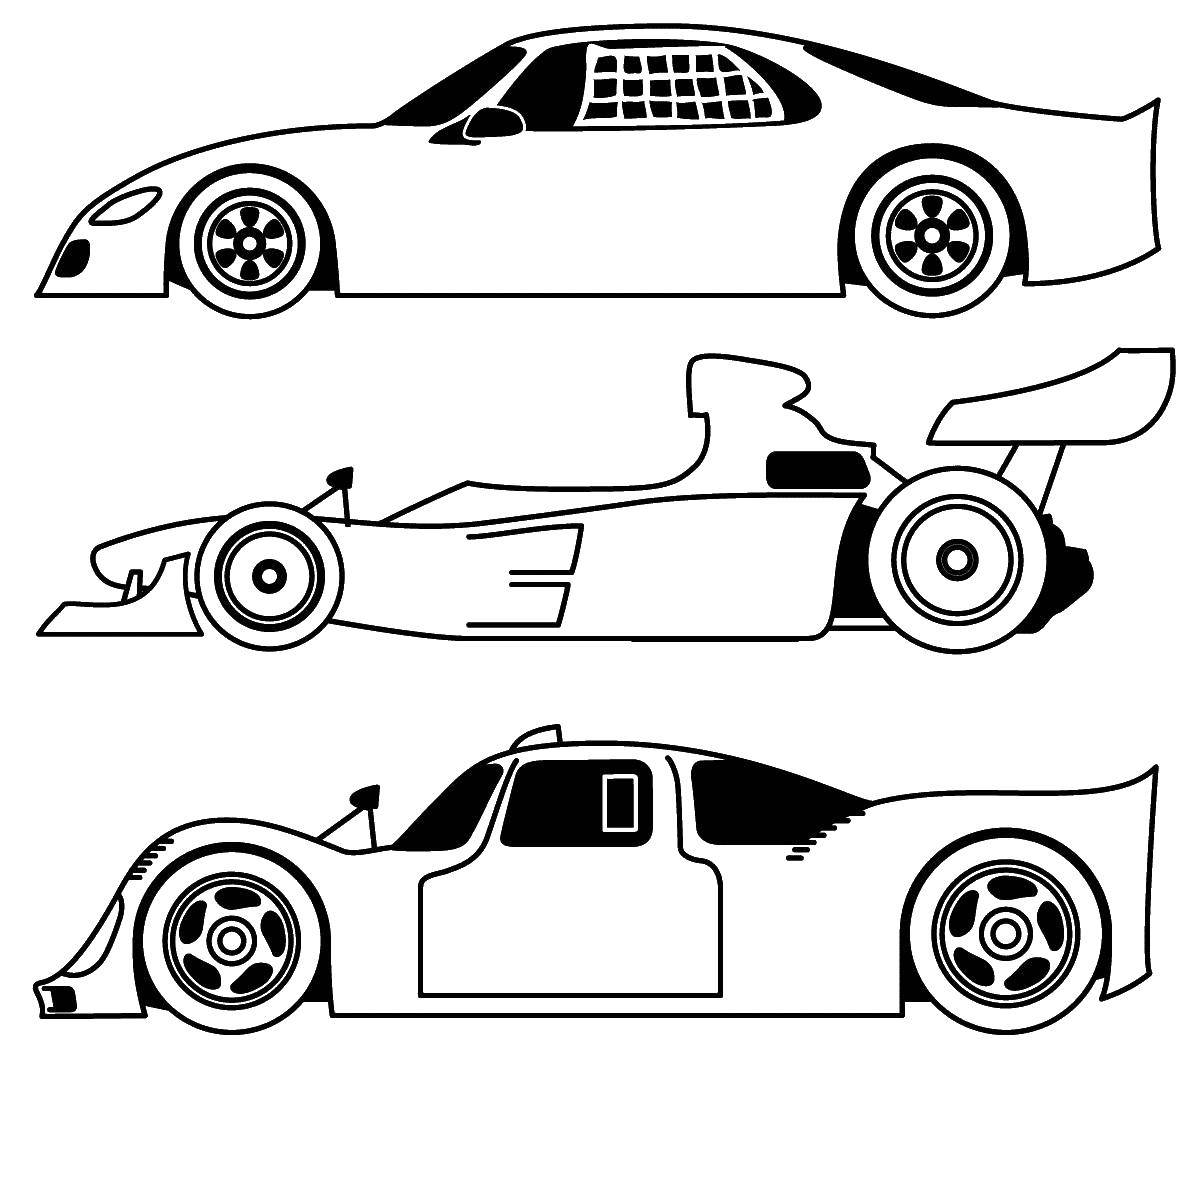 Coloring Race car. Category machine . Tags:  machine, transportation, racing cars.